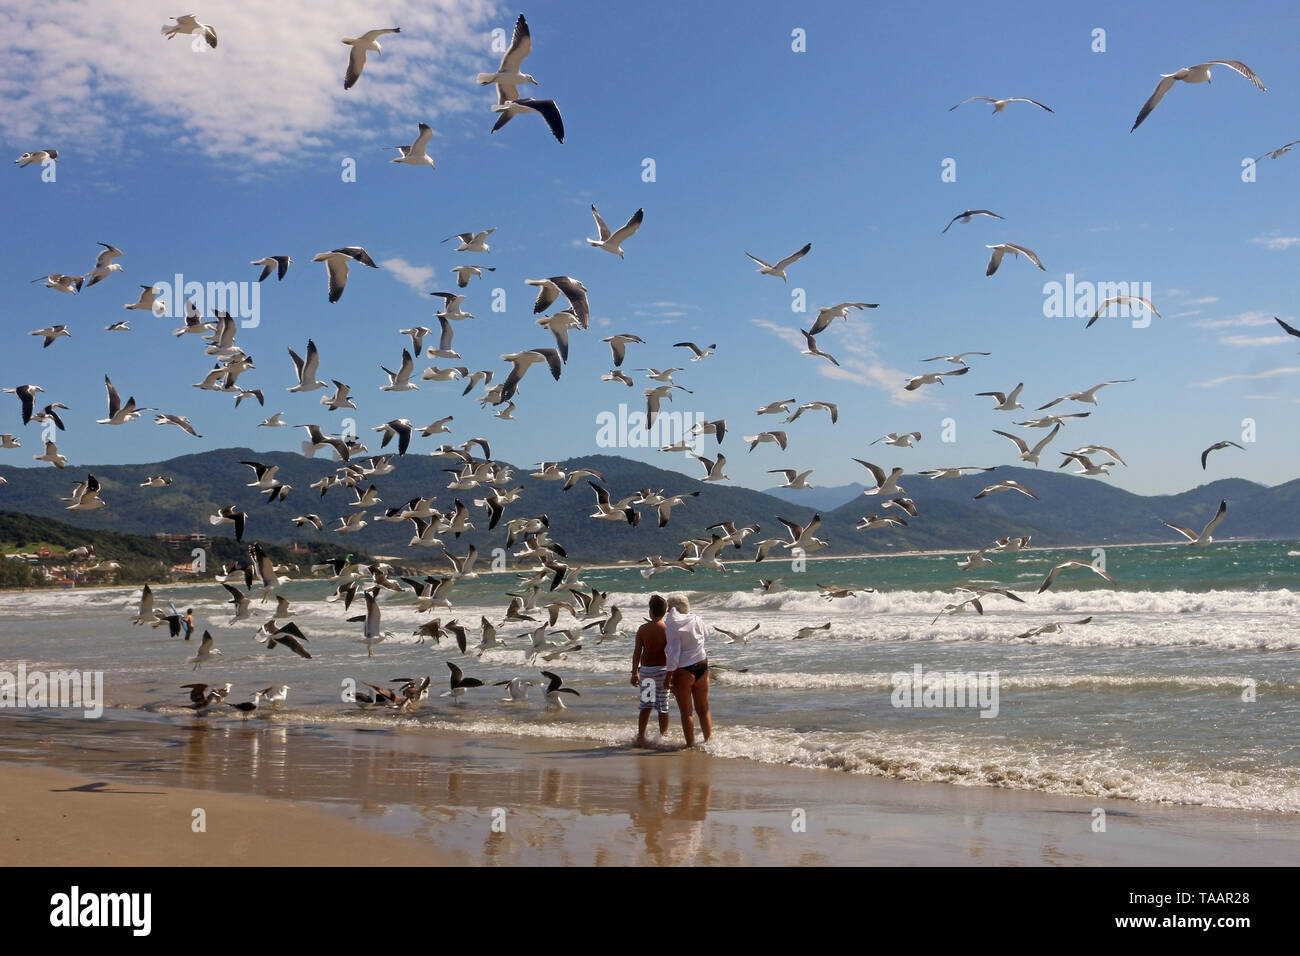 The seaside, surrounded by a flock of seagulls, the celebration of natural life. Stock Photo